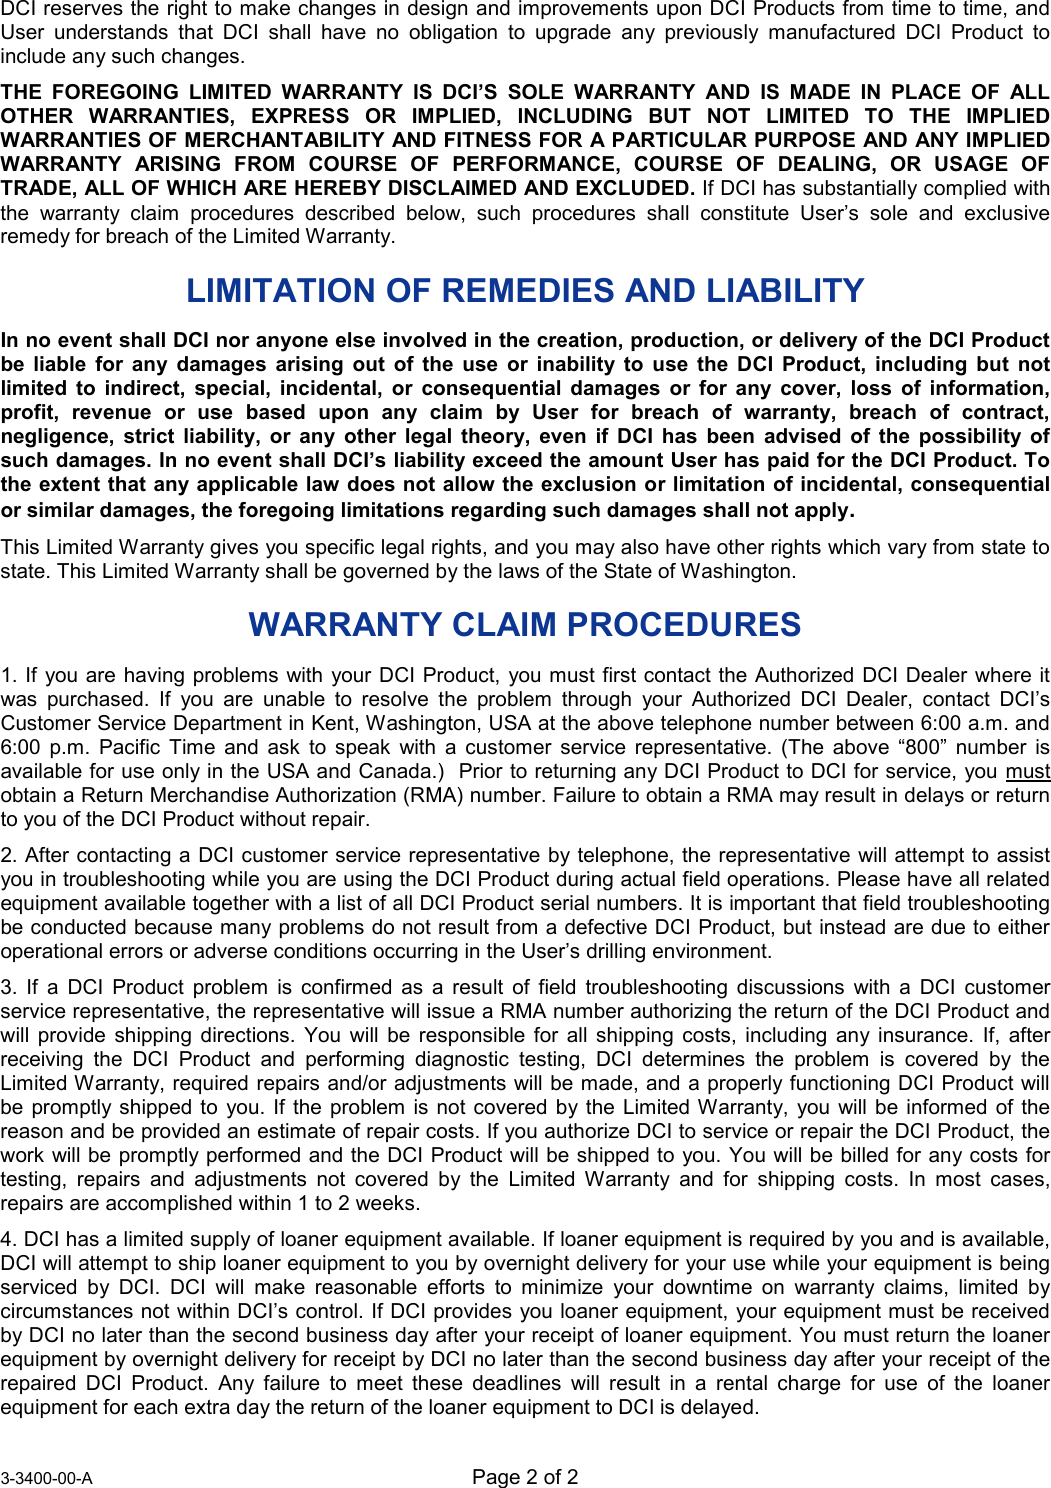  3-3400-00-A Page 2 of 2   DCI reserves the right to make changes in design and improvements upon DCI Products from time to time, and User understands that DCI shall have no obligation to upgrade any previously manufactured DCI Product to include any such changes. THE FOREGOING LIMITED WARRANTY IS DCI’S SOLE WARRANTY AND IS MADE IN PLACE OF ALL OTHER WARRANTIES, EXPRESS OR IMPLIED, INCLUDING BUT NOT LIMITED TO THE IMPLIED WARRANTIES OF MERCHANTABILITY AND FITNESS FOR A PARTICULAR PURPOSE AND ANY IMPLIED WARRANTY ARISING FROM COURSE OF PERFORMANCE, COURSE OF DEALING, OR USAGE OF TRADE, ALL OF WHICH ARE HEREBY DISCLAIMED AND EXCLUDED. If DCI has substantially complied with the warranty claim procedures described below, such procedures shall constitute User’s sole and exclusive remedy for breach of the Limited Warranty. LIMITATION OF REMEDIES AND LIABILITY  In no event shall DCI nor anyone else involved in the creation, production, or delivery of the DCI Product be liable for any damages arising out of the use or inability to use the DCI Product, including but not limited to indirect, special, incidental, or consequential damages or for any cover, loss of information, profit, revenue or use based upon any claim by User for breach of warranty, breach of contract, negligence, strict liability, or any other legal theory, even if DCI has been advised of the possibility of such damages. In no event shall DCI’s liability exceed the amount User has paid for the DCI Product. To the extent that any applicable law does not allow the exclusion or limitation of incidental, consequential or similar damages, the foregoing limitations regarding such damages shall not apply. This Limited Warranty gives you specific legal rights, and you may also have other rights which vary from state to state. This Limited Warranty shall be governed by the laws of the State of Washington. WARRANTY CLAIM PROCEDURES 1. If you are having problems with your DCI Product, you must first contact the Authorized DCI Dealer where it was purchased. If you are unable to resolve the problem through your Authorized DCI Dealer, contact DCI’s Customer Service Department in Kent, Washington, USA at the above telephone number between 6:00 a.m. and 6:00 p.m. Pacific Time and ask to speak with a customer service representative. (The above “800” number is available for use only in the USA and Canada.)  Prior to returning any DCI Product to DCI for service, you UmustU obtain a Return Merchandise Authorization (RMA) number. Failure to obtain a RMA may result in delays or return to you of the DCI Product without repair. 2. After contacting a DCI customer service representative by telephone, the representative will attempt to assist you in troubleshooting while you are using the DCI Product during actual field operations. Please have all related equipment available together with a list of all DCI Product serial numbers. It is important that field troubleshooting be conducted because many problems do not result from a defective DCI Product, but instead are due to either operational errors or adverse conditions occurring in the User’s drilling environment. 3. If a DCI Product problem is confirmed as a result of field troubleshooting discussions with a DCI customer service representative, the representative will issue a RMA number authorizing the return of the DCI Product and will provide shipping directions. You will be responsible for all shipping costs, including any insurance. If, after receiving the DCI Product and performing diagnostic testing, DCI determines the problem is covered by the Limited Warranty, required repairs and/or adjustments will be made, and a properly functioning DCI Product will be promptly shipped to you. If the problem is not covered by the Limited Warranty, you will be informed of the reason and be provided an estimate of repair costs. If you authorize DCI to service or repair the DCI Product, the work will be promptly performed and the DCI Product will be shipped to you. You will be billed for any costs for testing, repairs and adjustments not covered by the Limited Warranty and for shipping costs. In most cases, repairs are accomplished within 1 to 2 weeks. 4. DCI has a limited supply of loaner equipment available. If loaner equipment is required by you and is available, DCI will attempt to ship loaner equipment to you by overnight delivery for your use while your equipment is being serviced by DCI. DCI will make reasonable efforts to minimize your downtime on warranty claims, limited by circumstances not within DCI’s control. If DCI provides you loaner equipment, your equipment must be received by DCI no later than the second business day after your receipt of loaner equipment. You must return the loaner equipment by overnight delivery for receipt by DCI no later than the second business day after your receipt of the repaired DCI Product. Any failure to meet these deadlines will result in a rental charge for use of the loaner equipment for each extra day the return of the loaner equipment to DCI is delayed. 